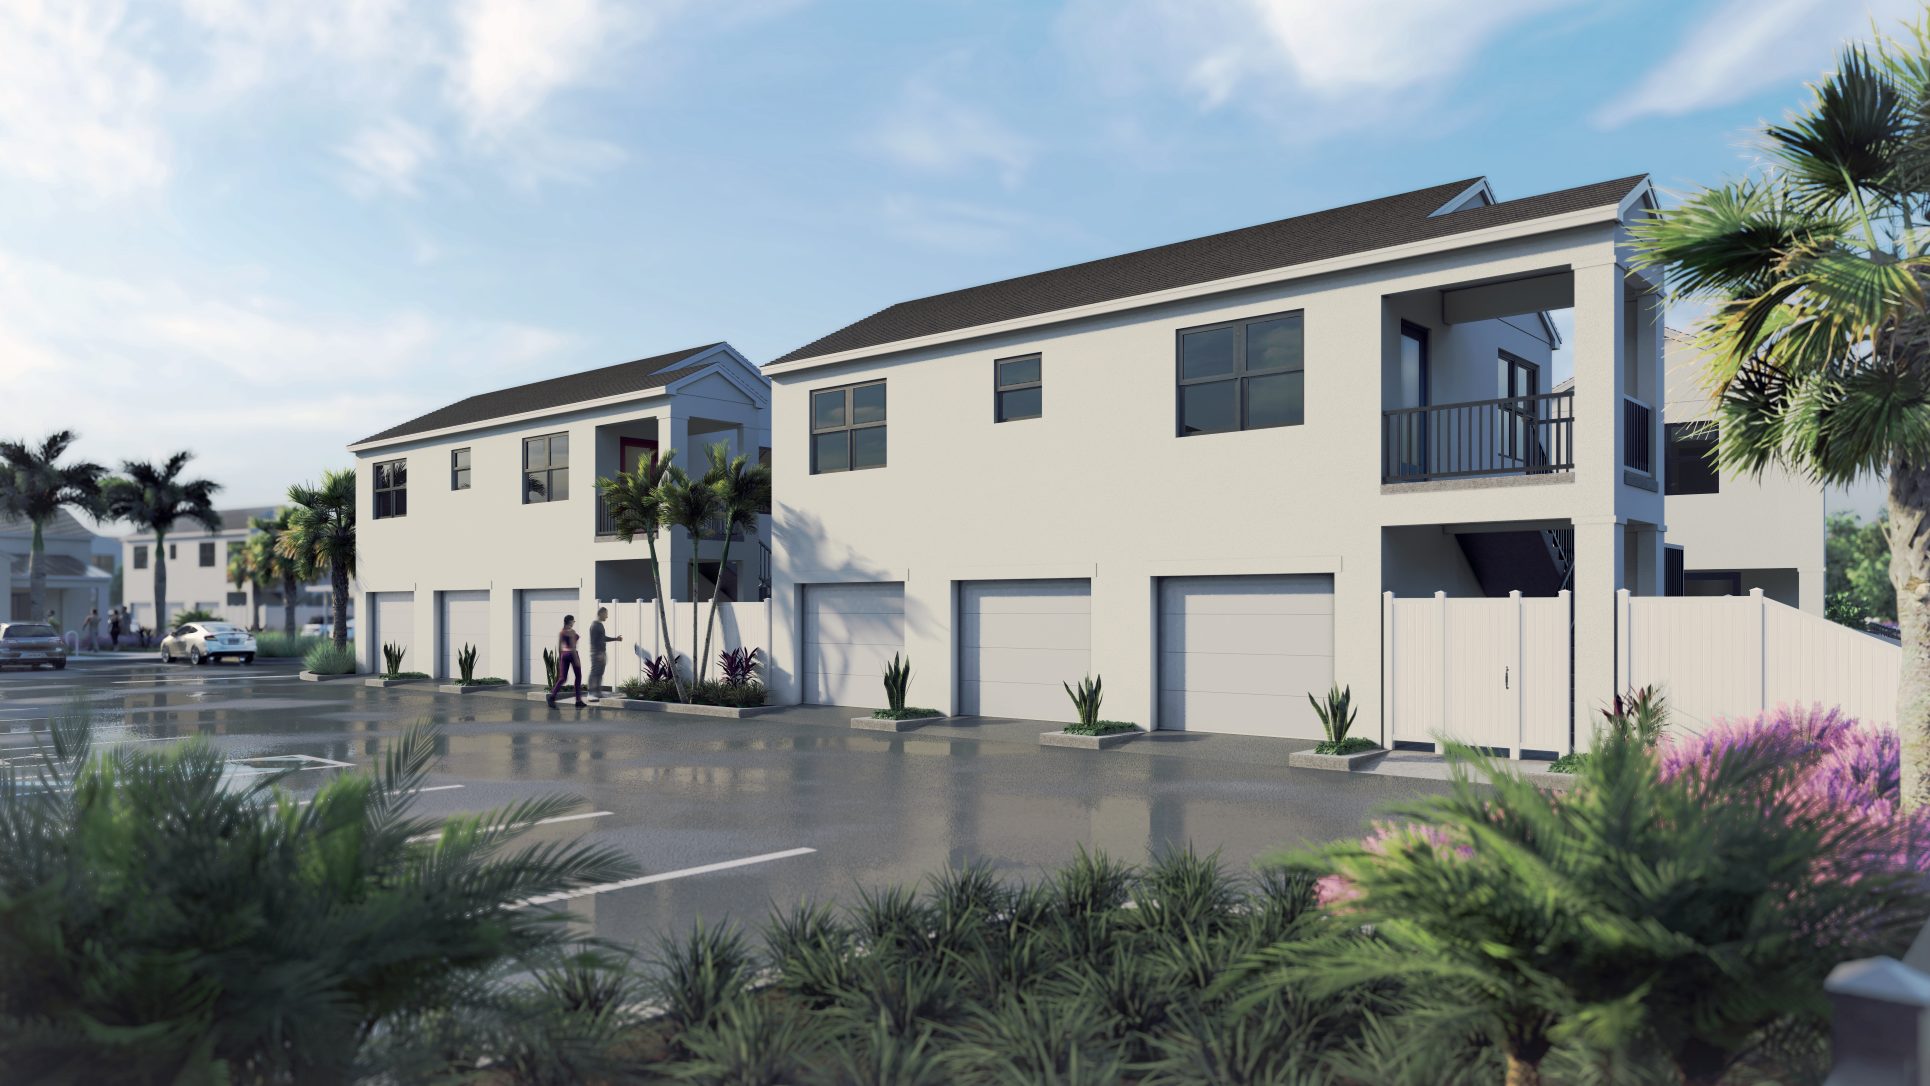 Halstatt Real Estate Partners Breaks Ground on New 140-Unit Argos by Soltura Build-for-Rent Community Located in Fort Myers, Florida